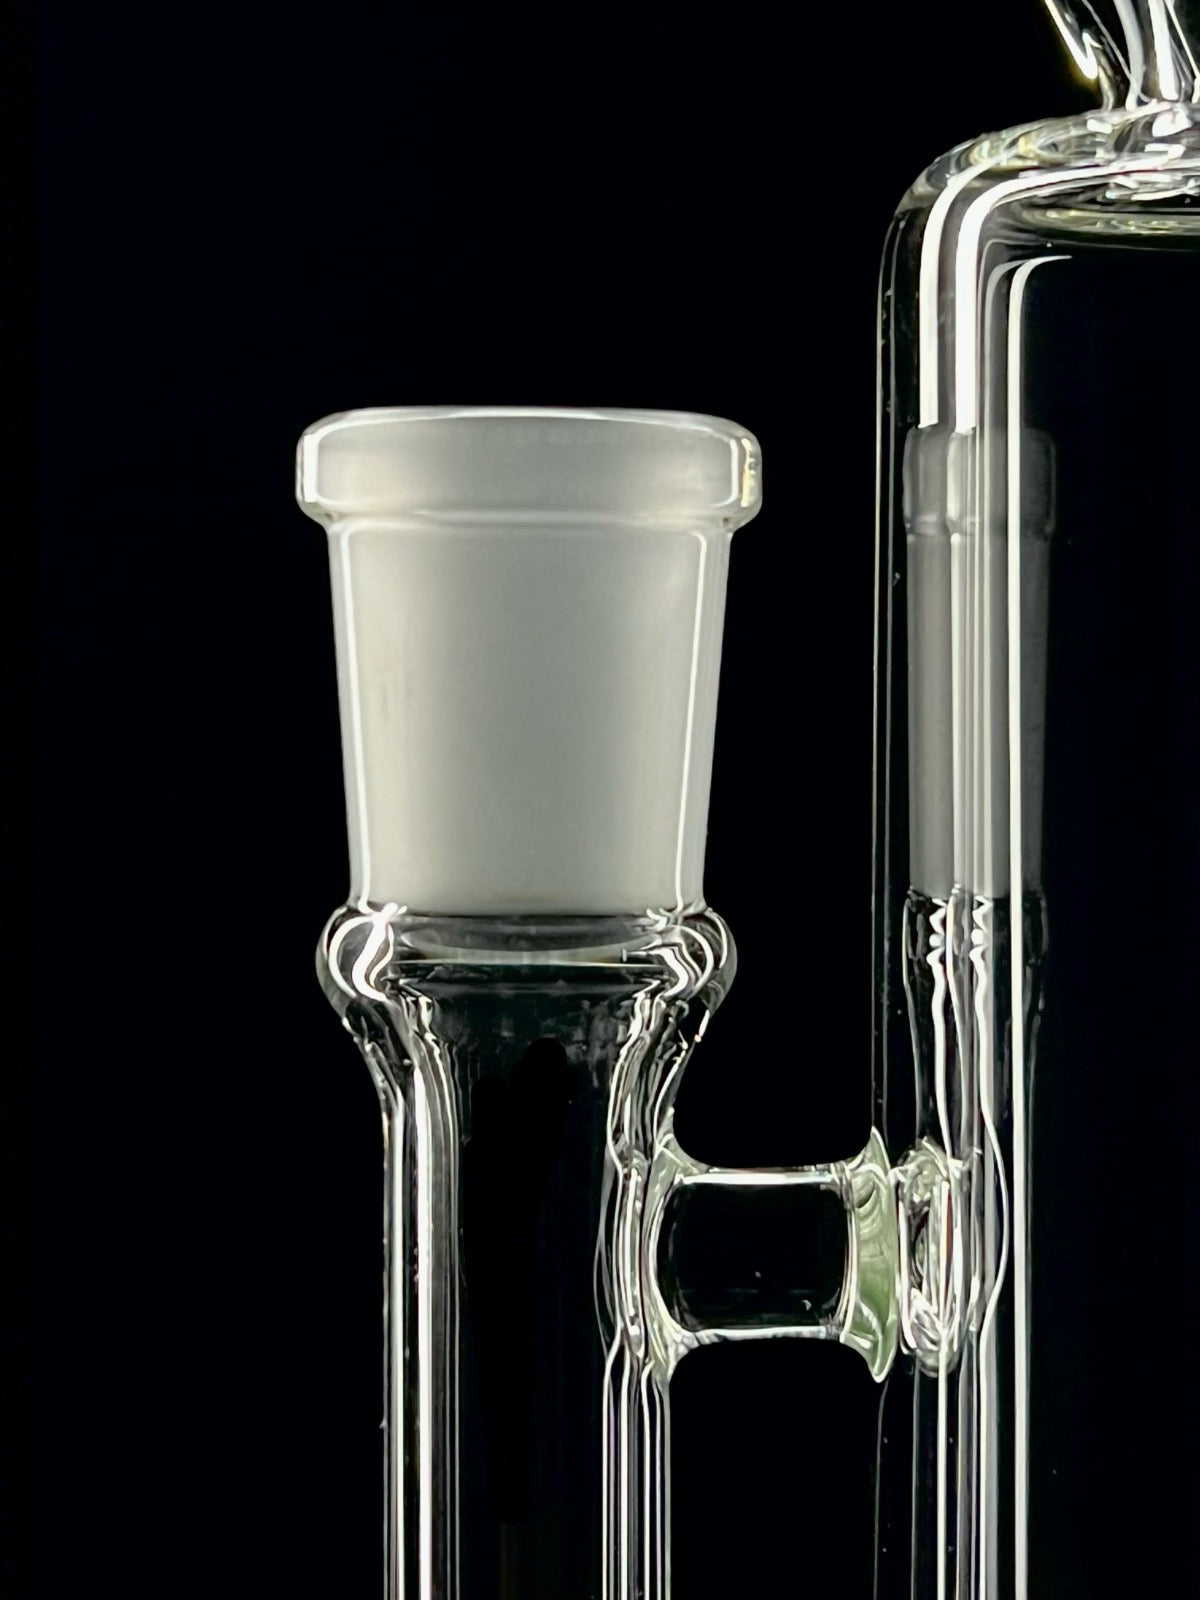 Clear gridded rig by Mercurius Glass